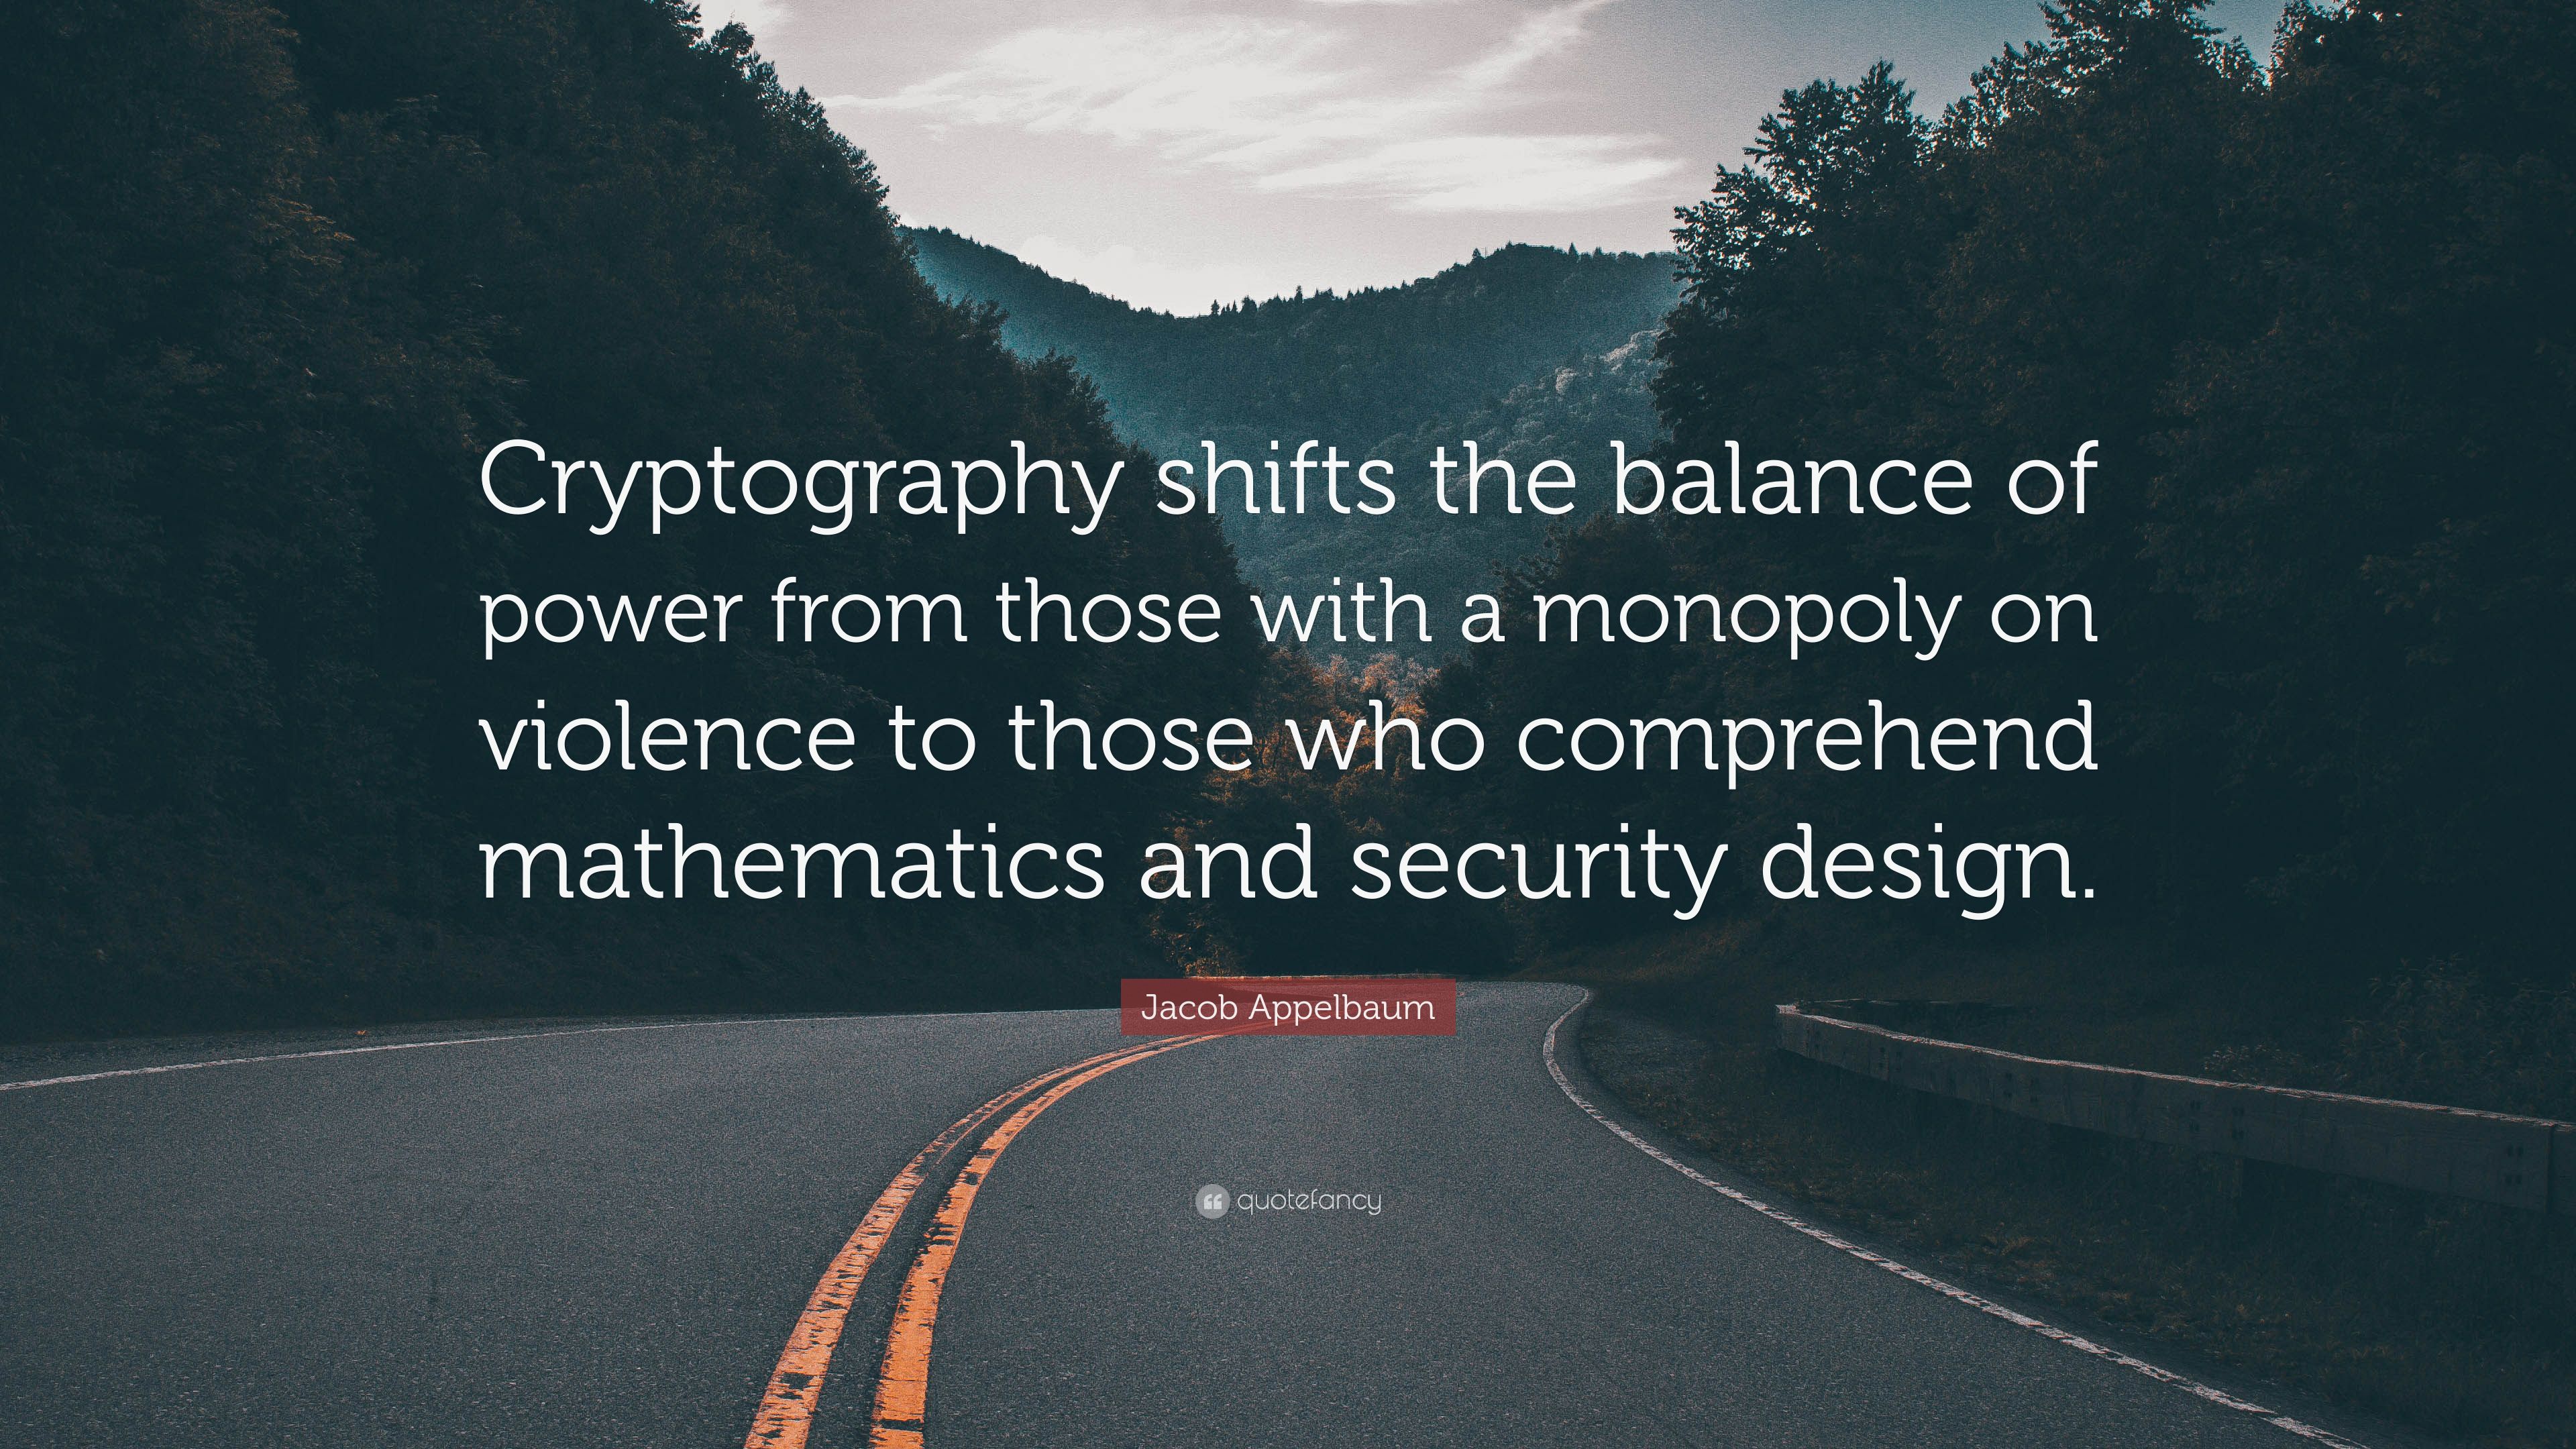 Jacob Appelbaum Quote: “Cryptography shifts the balance of power from those with a monopoly on violence to those who comprehend mathematics and .”